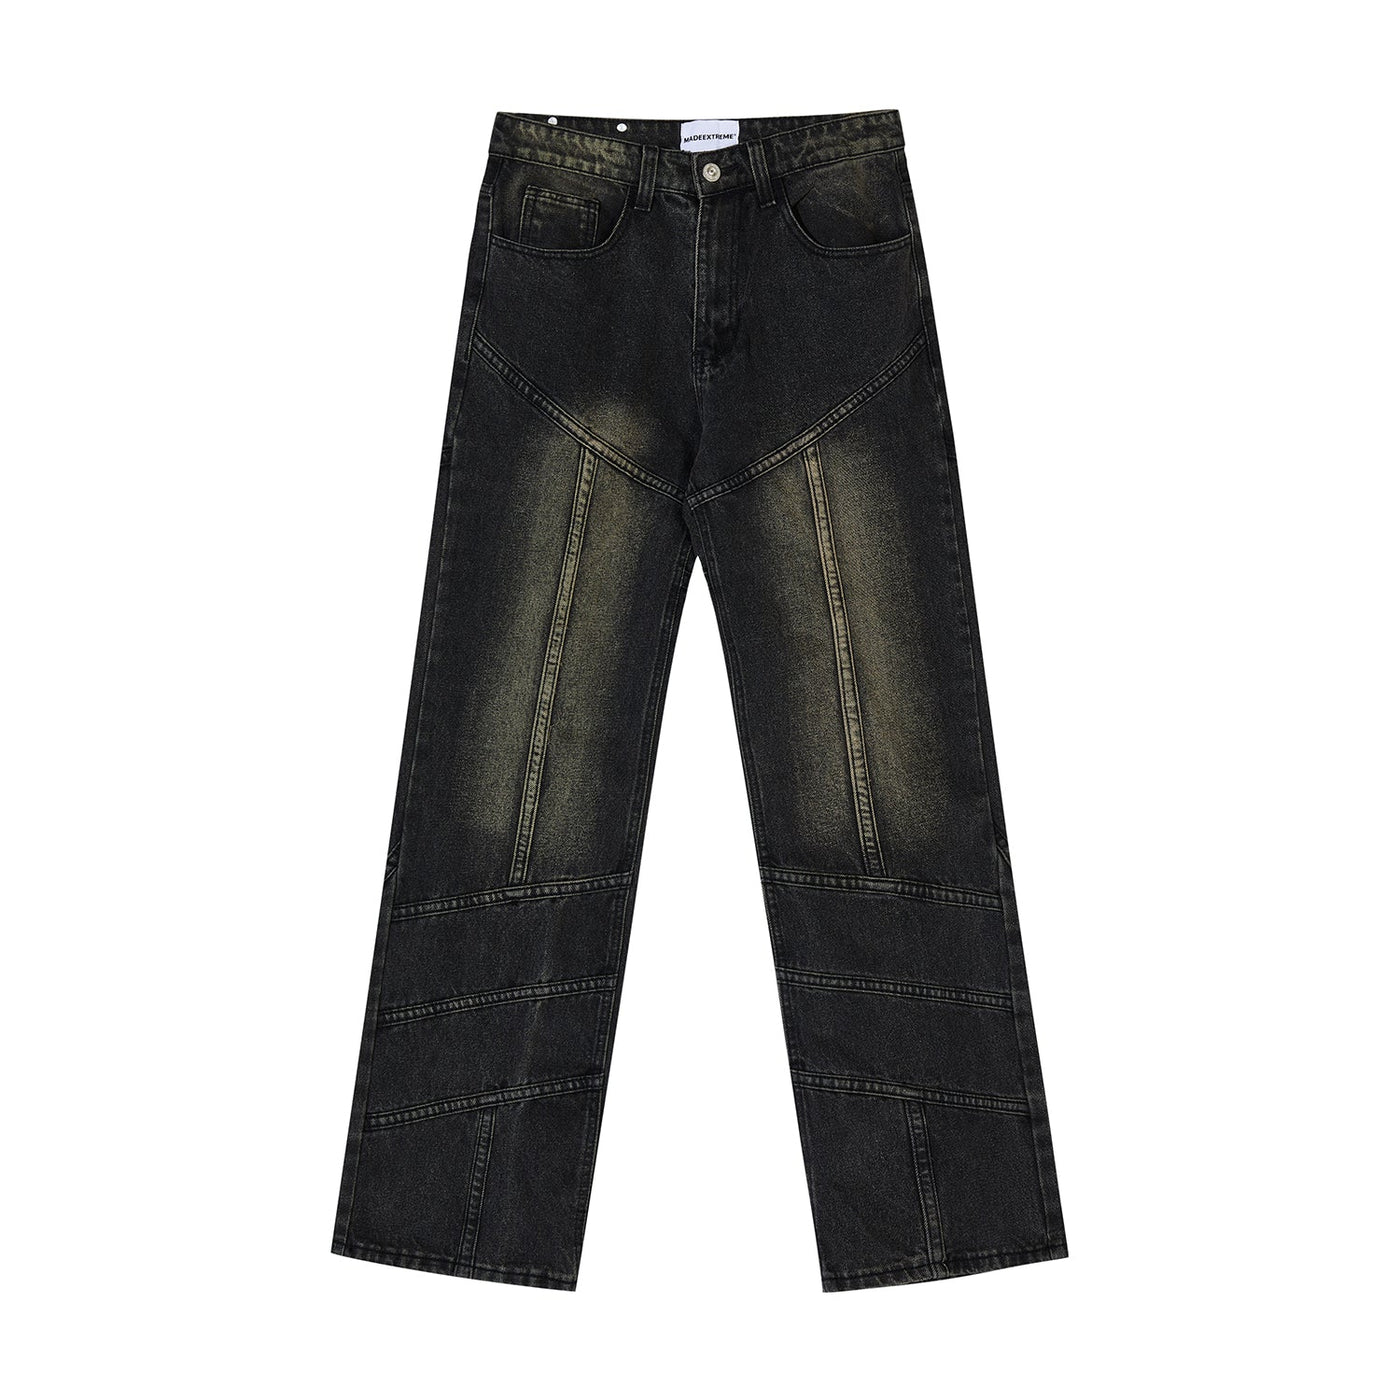 Vintage Washed Seam Detail Jeans Korean Street Fashion Jeans By Made Extreme Shop Online at OH Vault